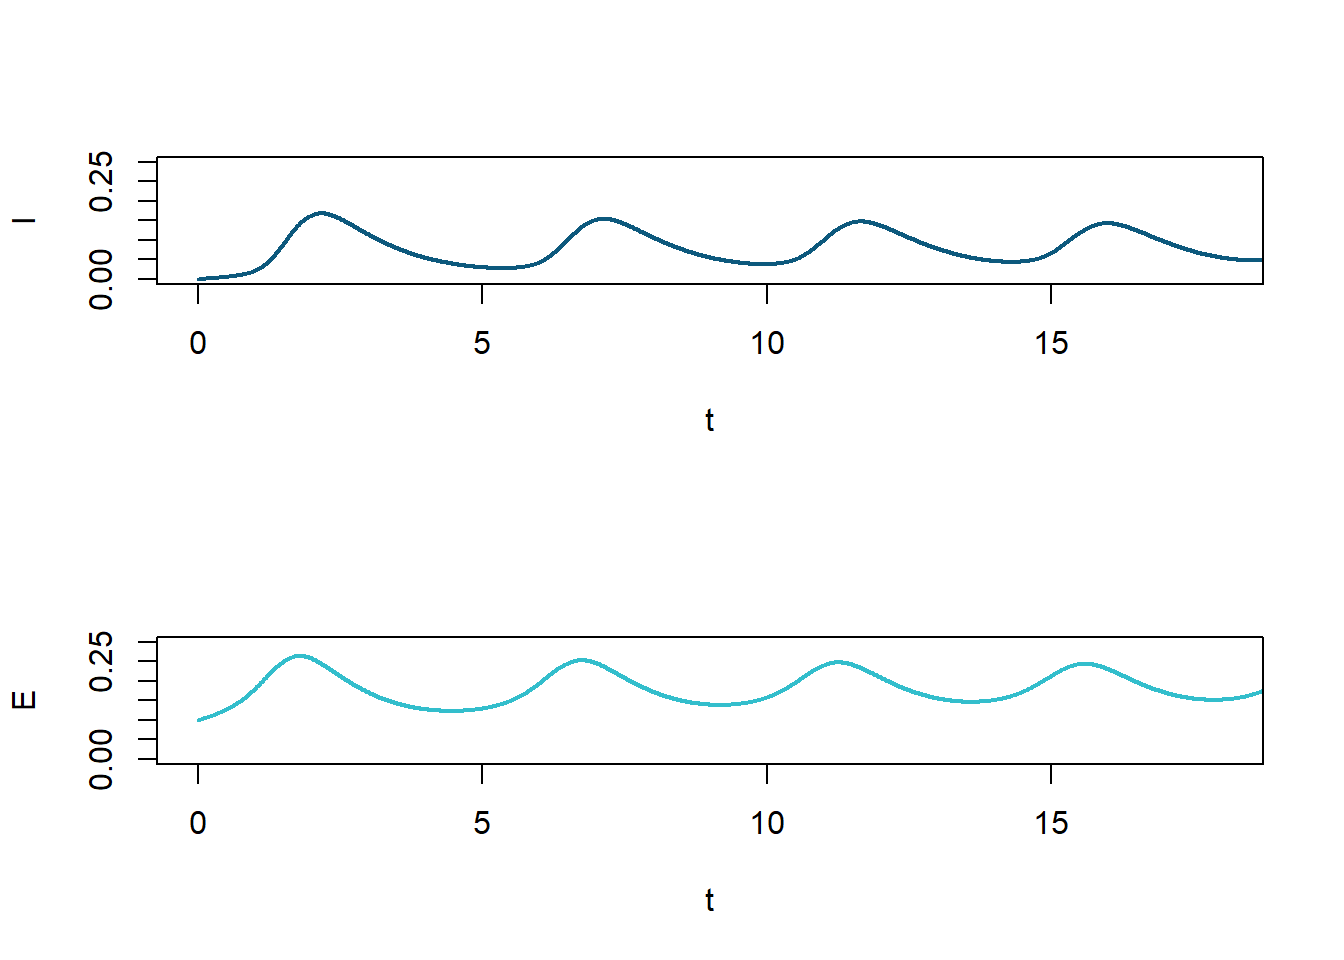 Figure  12: $I(t)$ and $E(t)$ for limit cycle shown in Fig. 9. The limit cycle depends on the value of $P$, i.e. $Q$ being set equal to zero.